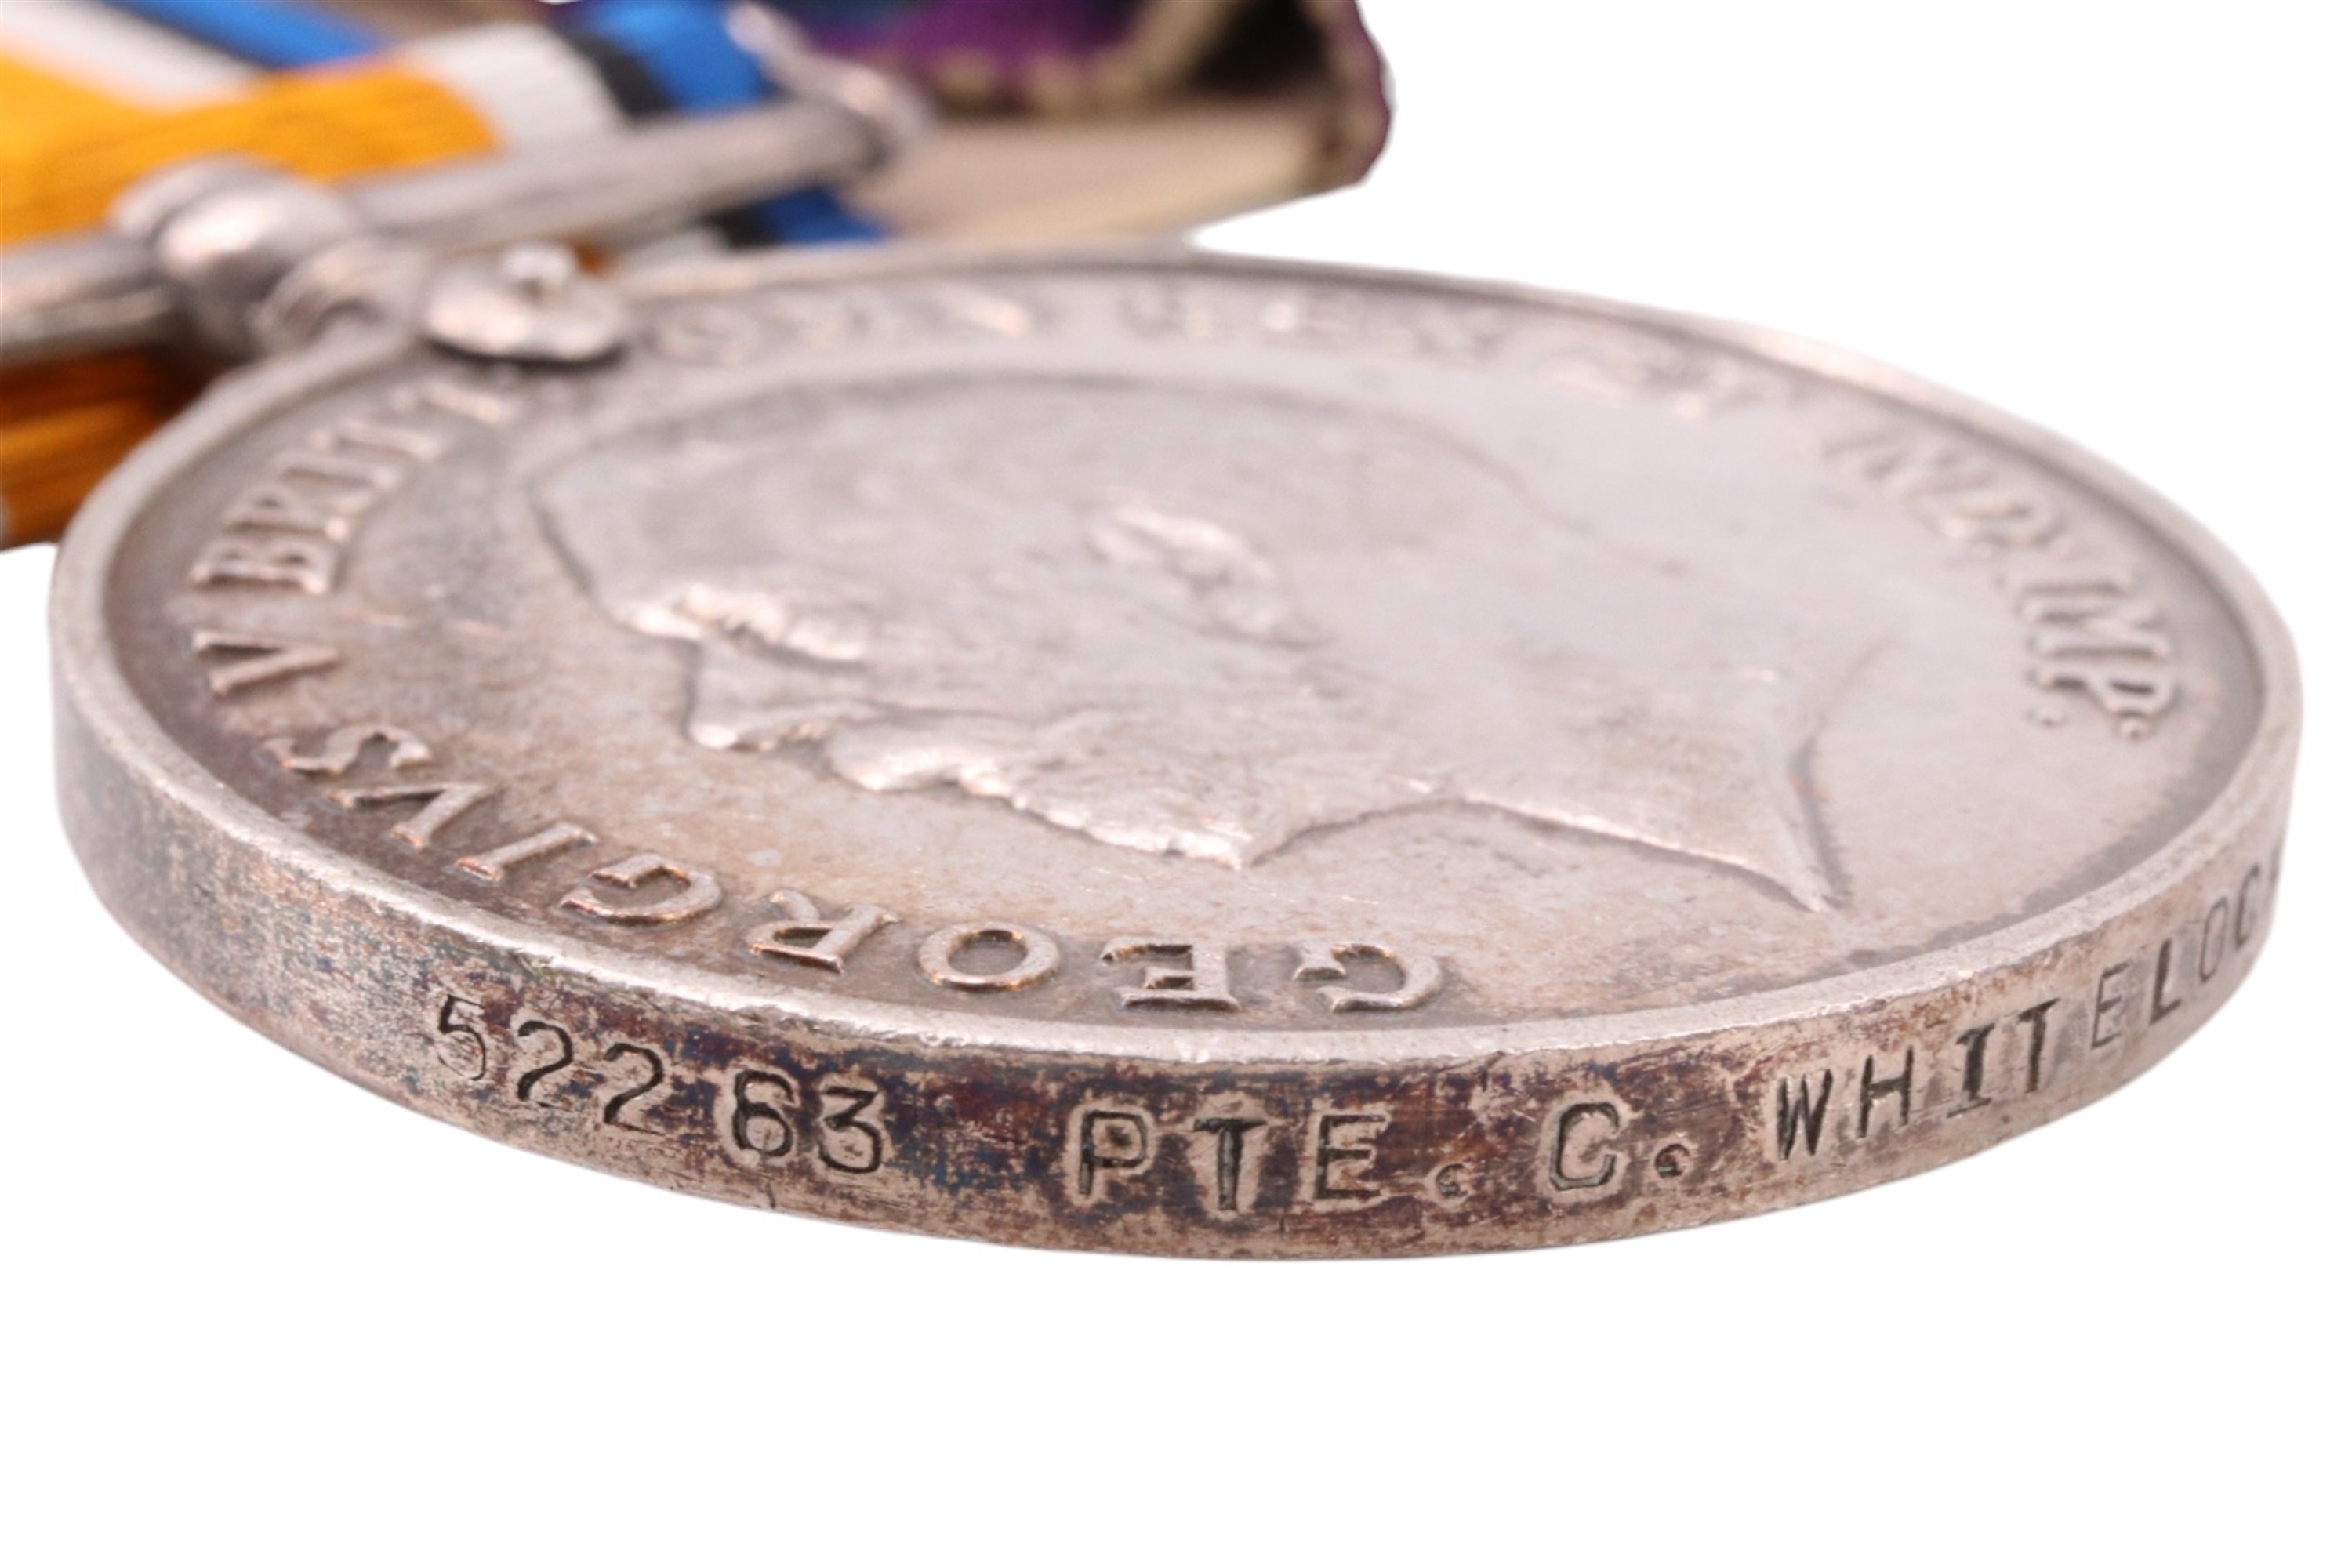 A British War and Allied Victory Medals to 52263 Pte G Whitelock, Durham Light Infantry - Image 3 of 4